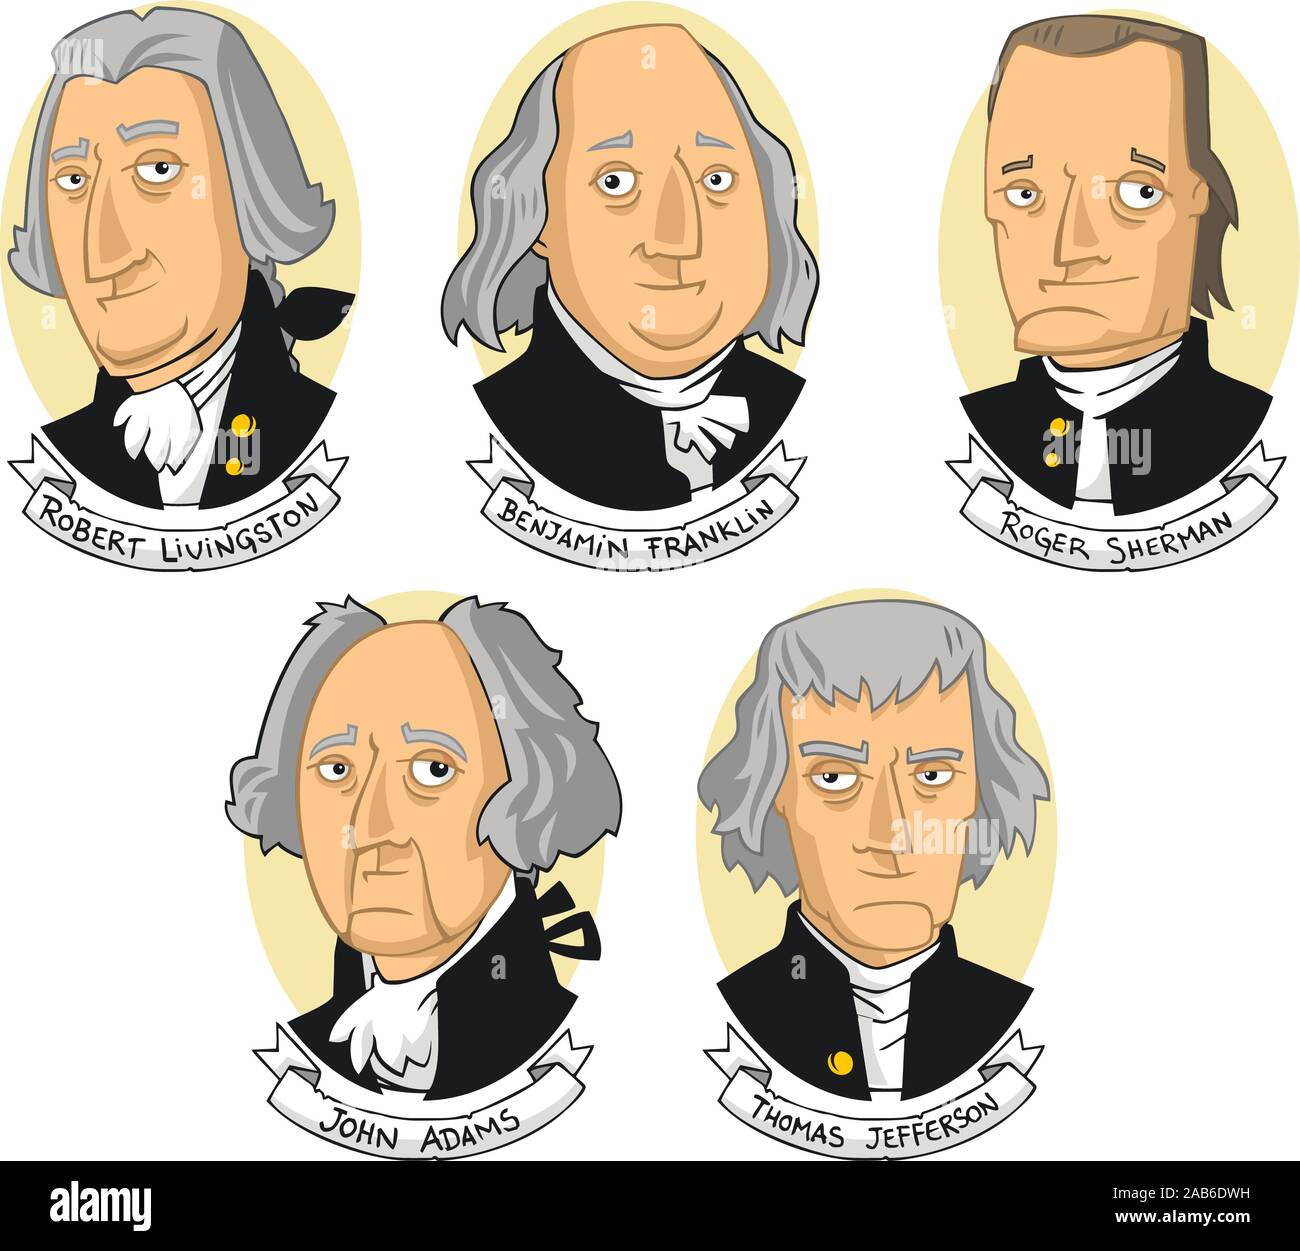 United states of america founding fathers cartoon collection Stock Vector